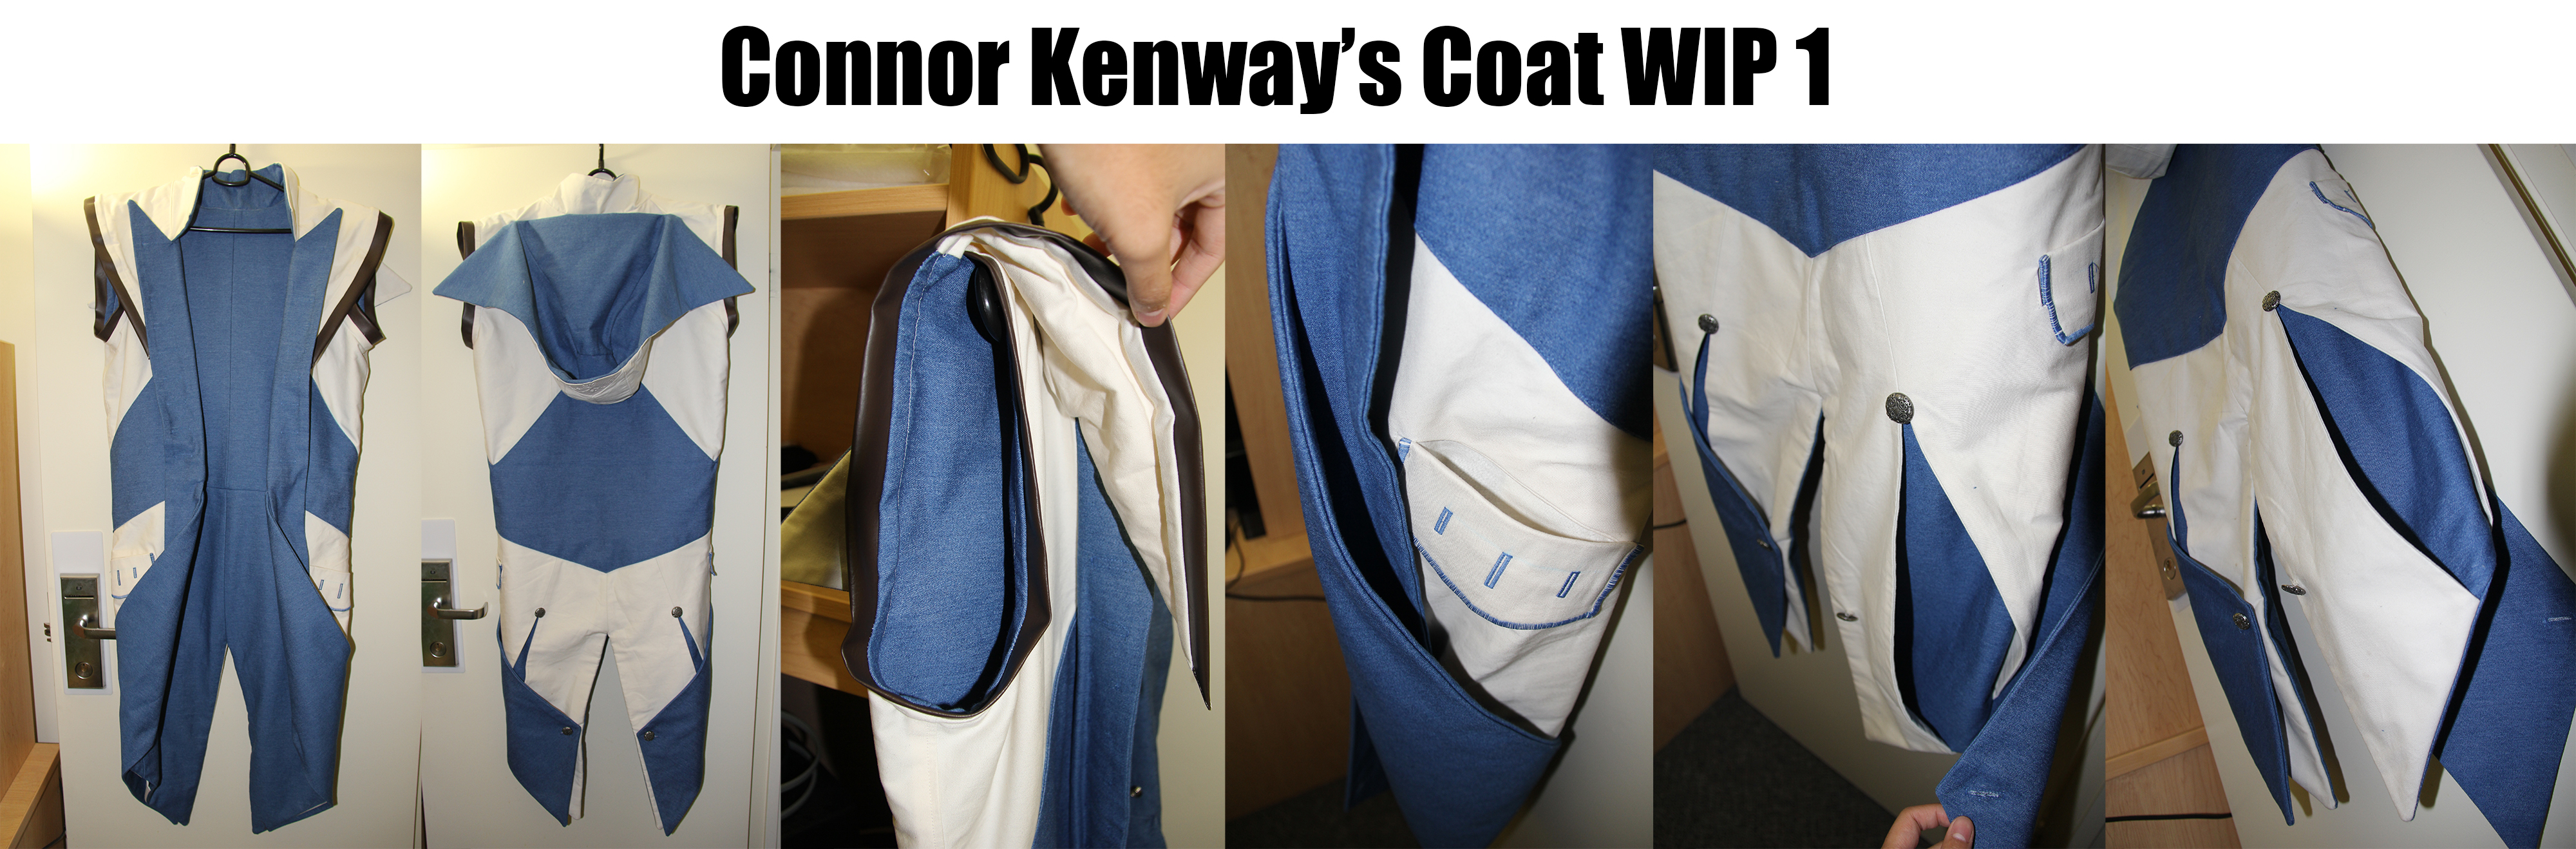 AC3 Connor Kenway Coat WIP 01 by yulittle on DeviantArt